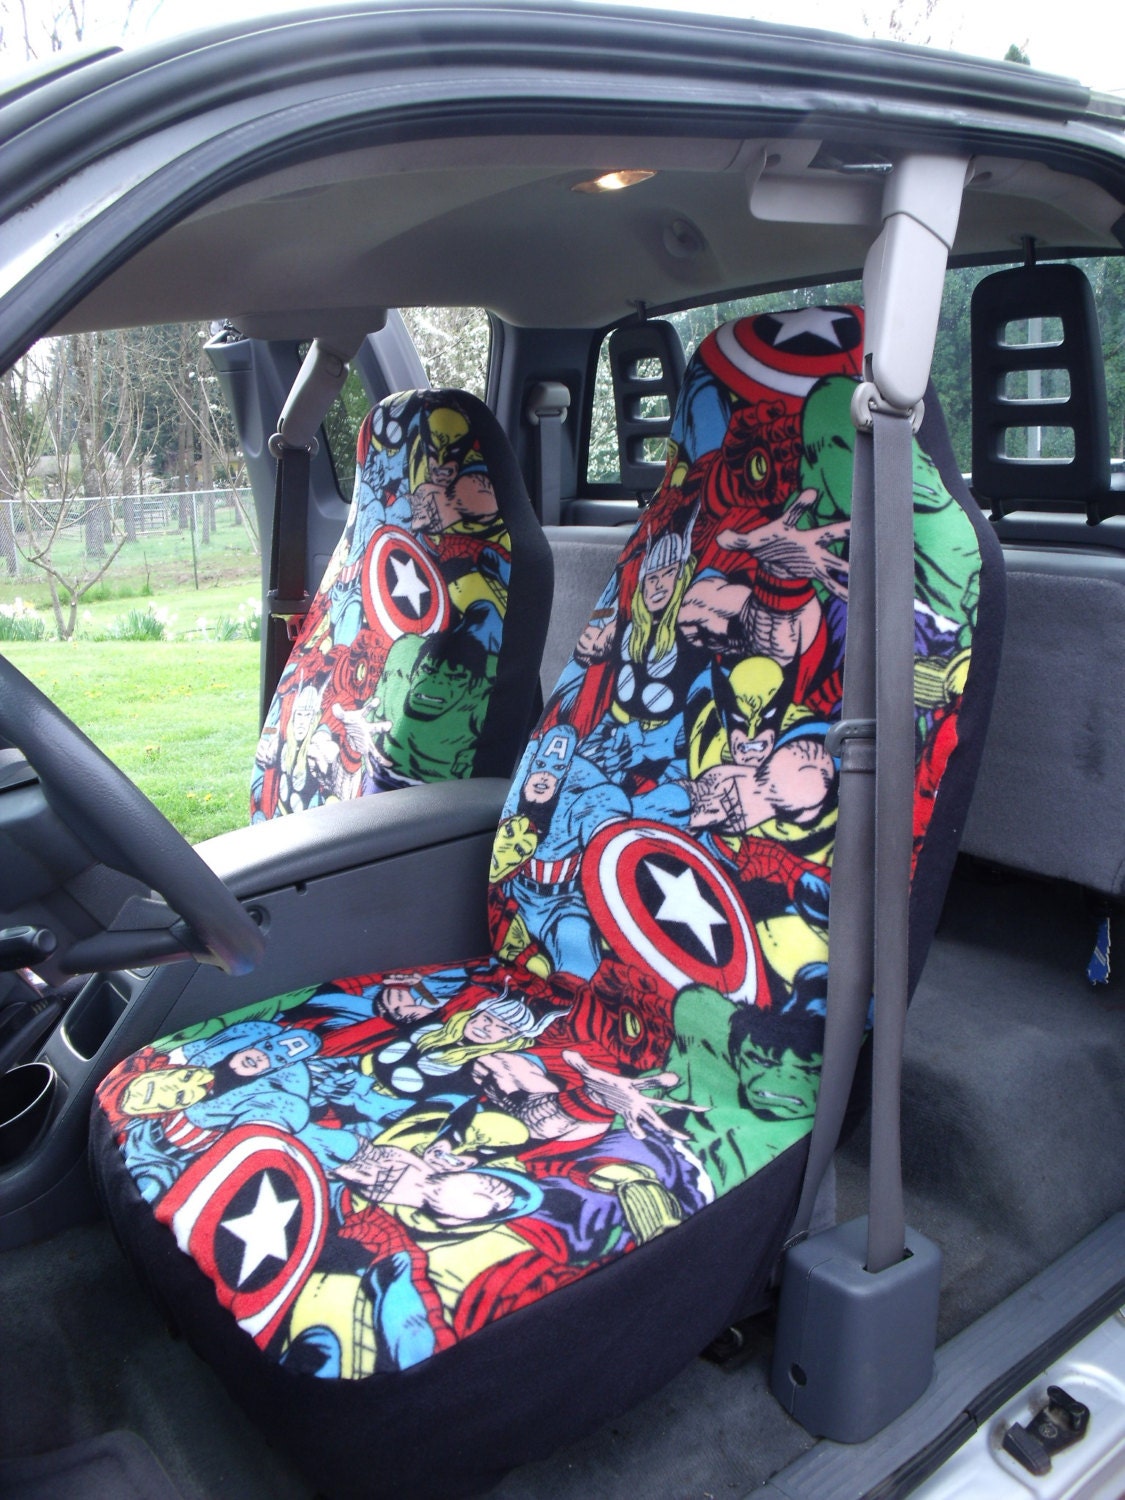 1 Set of Marvel Comic Print Car Seat Covers and steering